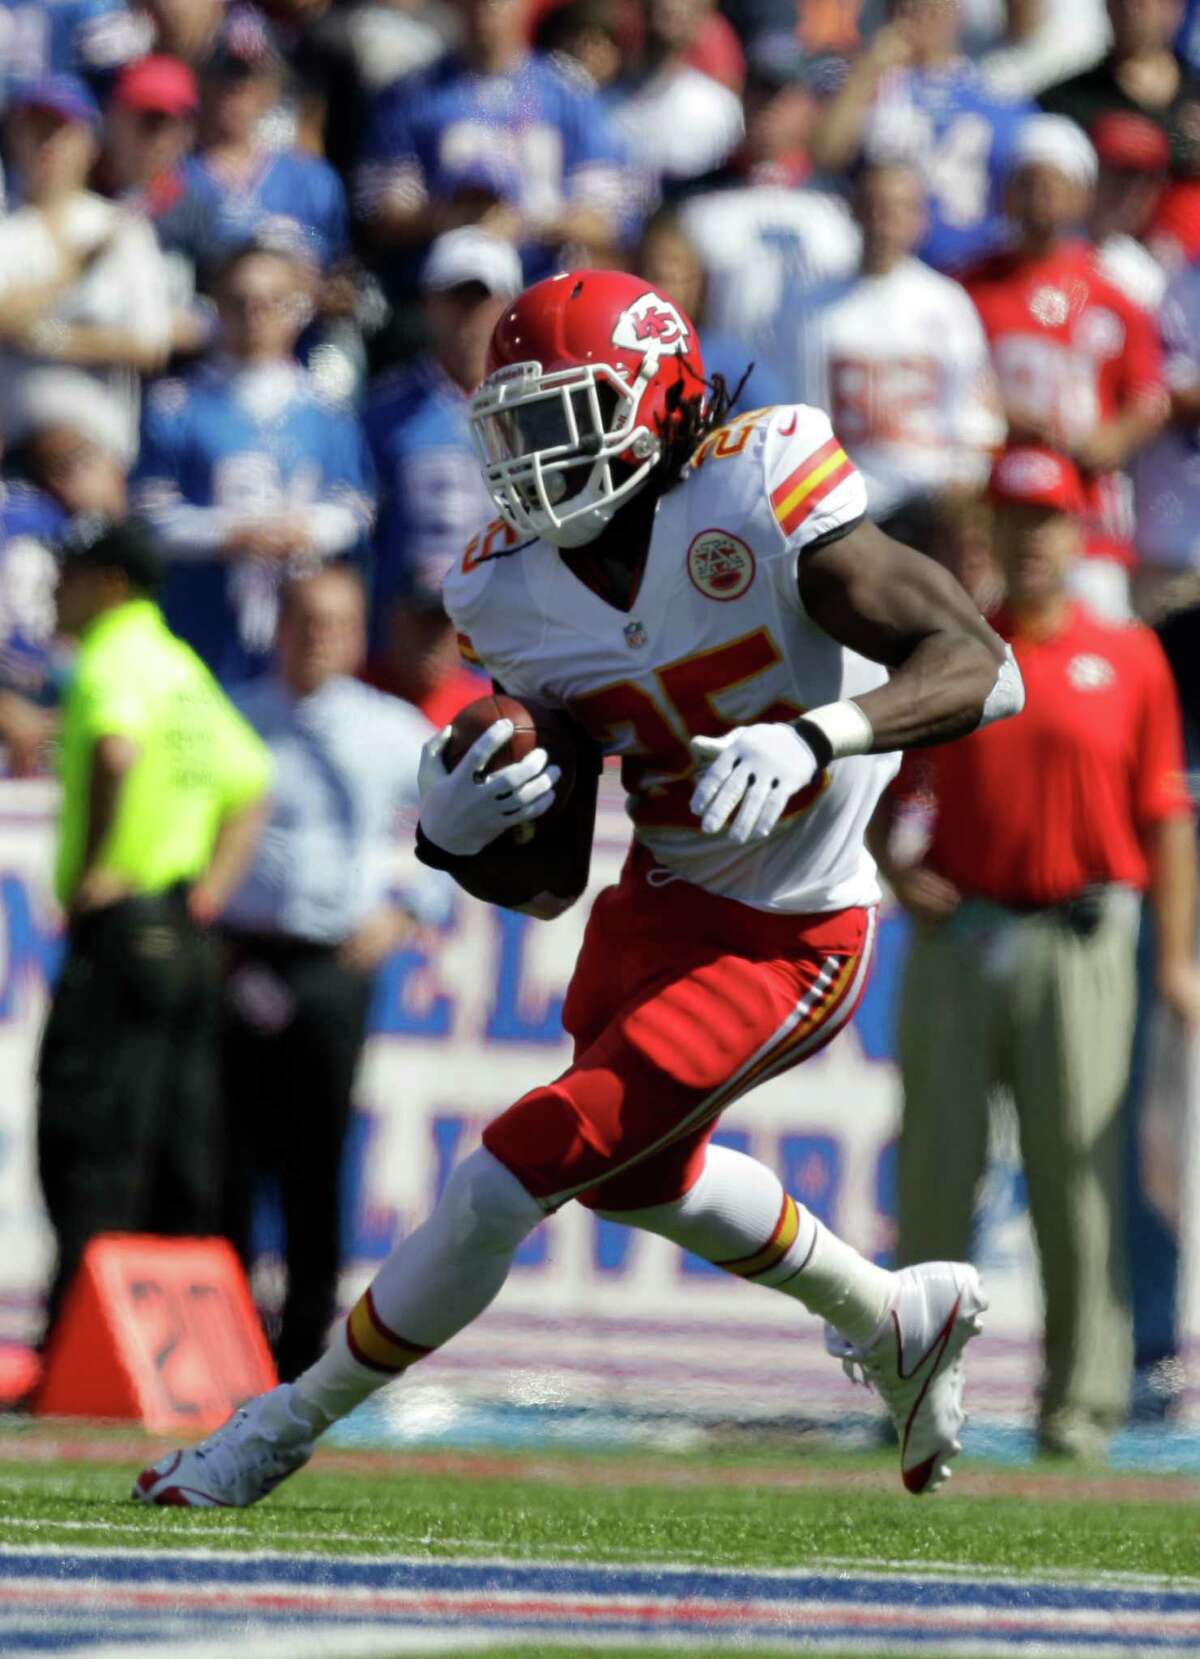 Jamaal Charles injured during Chiefs practice